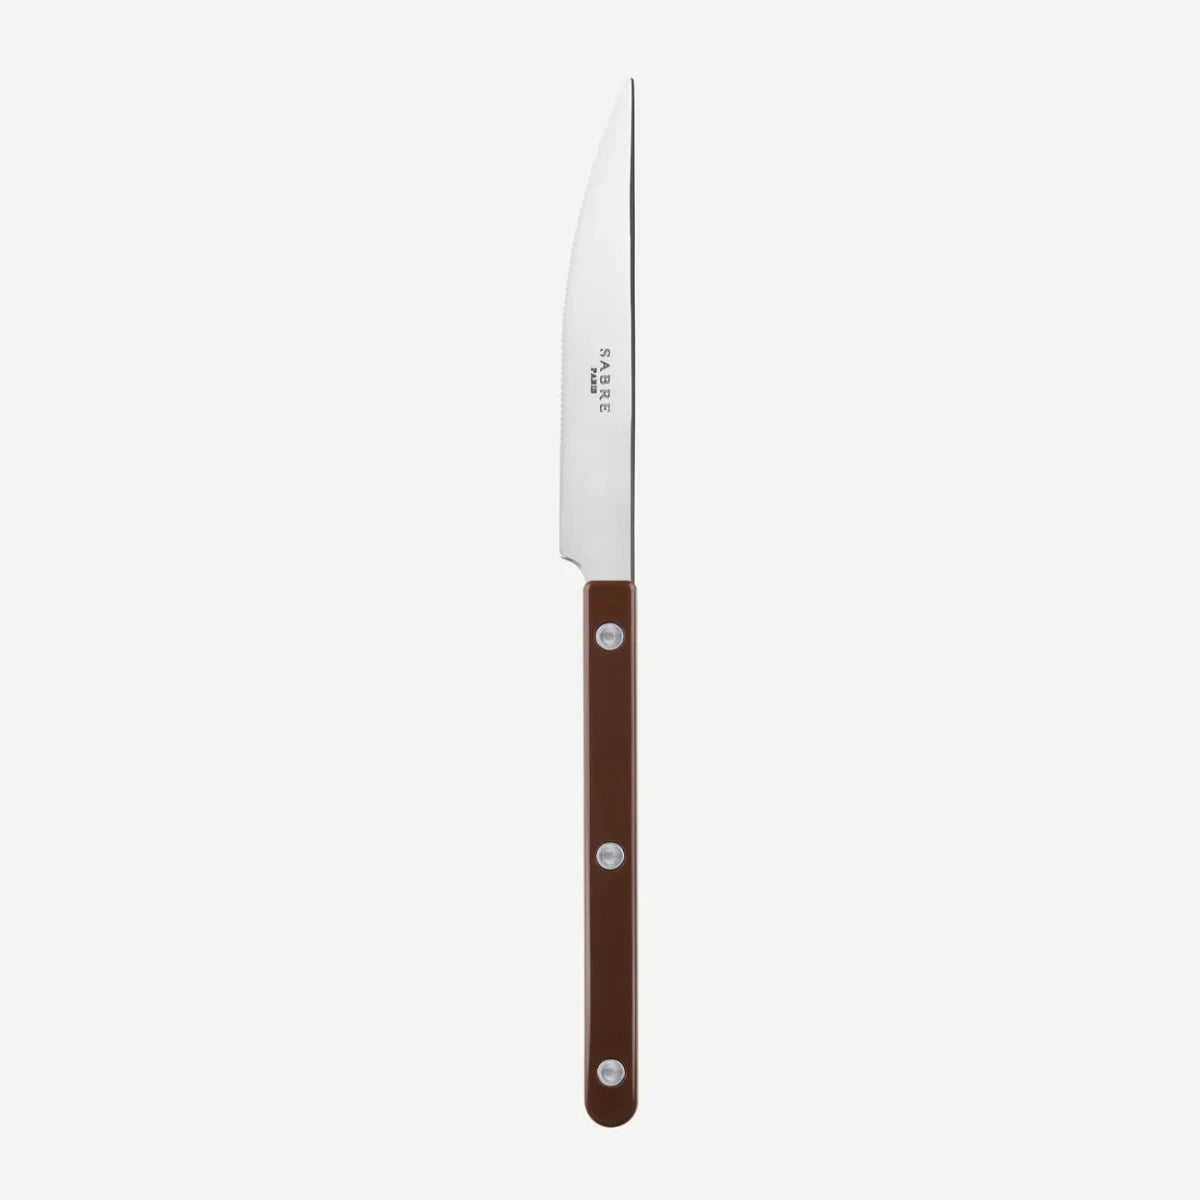 Bistrot Cutlery // Chocolate